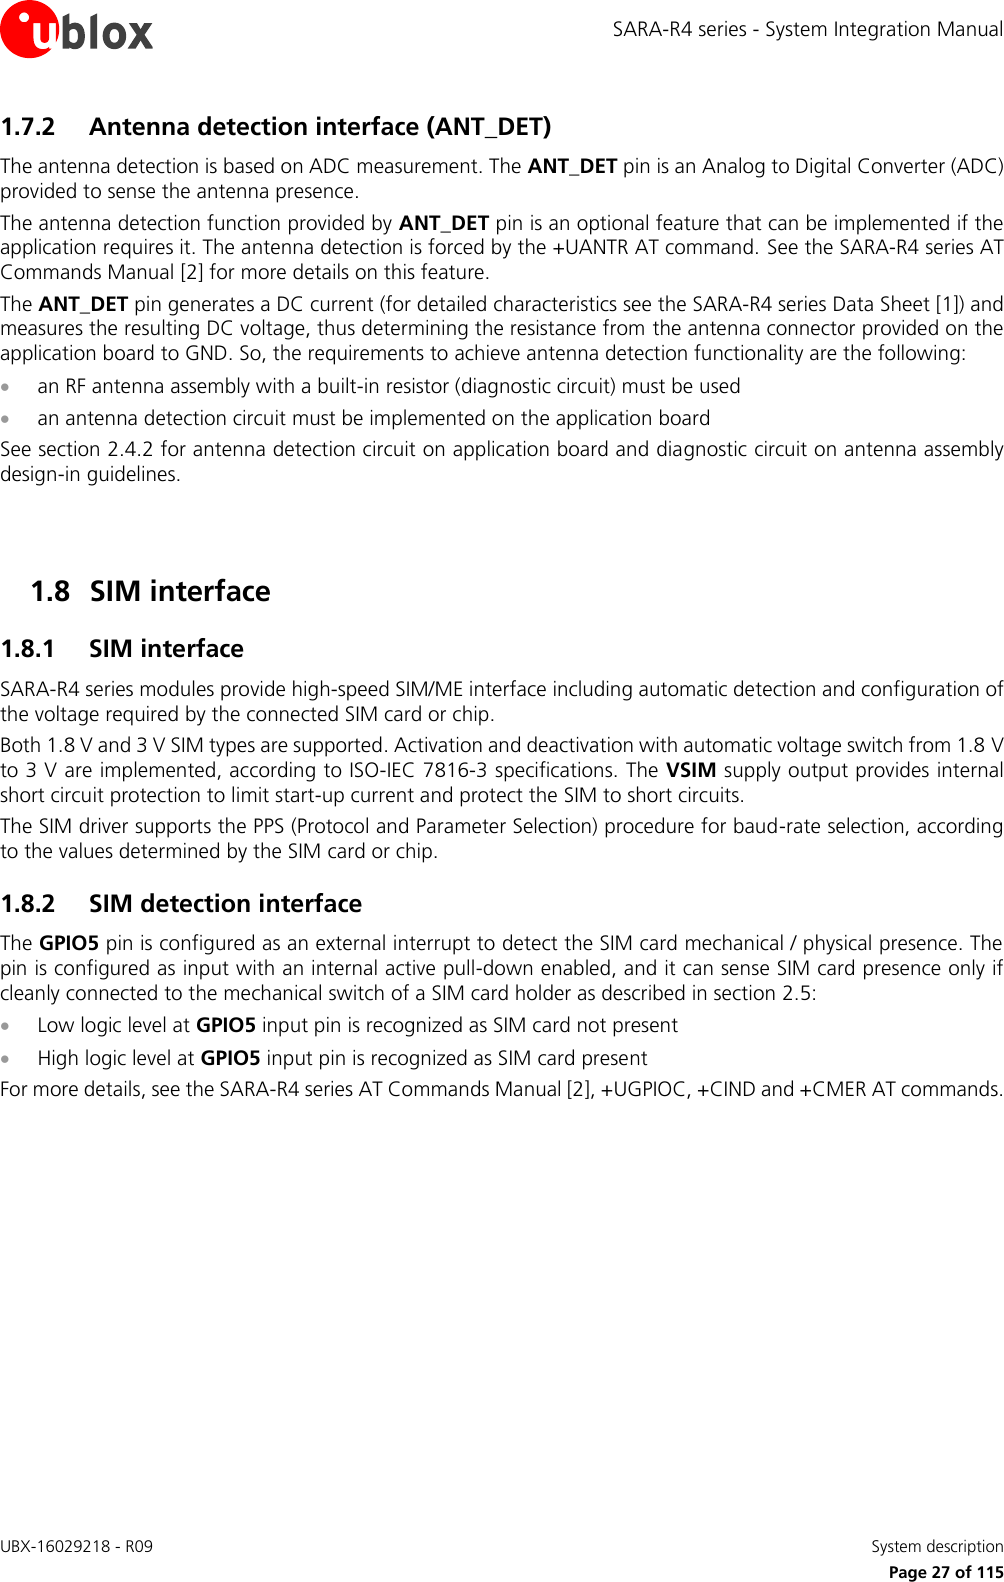 SARA-R4 series - System Integration Manual UBX-16029218 - R09    System description     Page 27 of 115 1.7.2 Antenna detection interface (ANT_DET) The antenna detection is based on ADC measurement. The ANT_DET pin is an Analog to Digital Converter (ADC) provided to sense the antenna presence. The antenna detection function provided by ANT_DET pin is an optional feature that can be implemented if the application requires it. The antenna detection is forced by the +UANTR AT command. See the SARA-R4 series AT Commands Manual [2] for more details on this feature. The ANT_DET pin generates a DC current (for detailed characteristics see the SARA-R4 series Data Sheet [1]) and measures the resulting DC voltage, thus determining the resistance from the antenna connector provided on the application board to GND. So, the requirements to achieve antenna detection functionality are the following:  an RF antenna assembly with a built-in resistor (diagnostic circuit) must be used  an antenna detection circuit must be implemented on the application board See section 2.4.2 for antenna detection circuit on application board and diagnostic circuit on antenna assembly design-in guidelines.   1.8 SIM interface 1.8.1 SIM interface SARA-R4 series modules provide high-speed SIM/ME interface including automatic detection and configuration of the voltage required by the connected SIM card or chip. Both 1.8 V and 3 V SIM types are supported. Activation and deactivation with automatic voltage switch from 1.8 V to 3 V are implemented, according to ISO-IEC 7816-3 specifications. The VSIM supply output provides internal short circuit protection to limit start-up current and protect the SIM to short circuits. The SIM driver supports the PPS (Protocol and Parameter Selection) procedure for baud-rate selection, according to the values determined by the SIM card or chip. 1.8.2 SIM detection interface The GPIO5 pin is configured as an external interrupt to detect the SIM card mechanical / physical presence. The pin is configured as input with an internal active pull-down enabled, and it can sense SIM card presence only if cleanly connected to the mechanical switch of a SIM card holder as described in section 2.5:  Low logic level at GPIO5 input pin is recognized as SIM card not present  High logic level at GPIO5 input pin is recognized as SIM card present For more details, see the SARA-R4 series AT Commands Manual [2], +UGPIOC, +CIND and +CMER AT commands.  